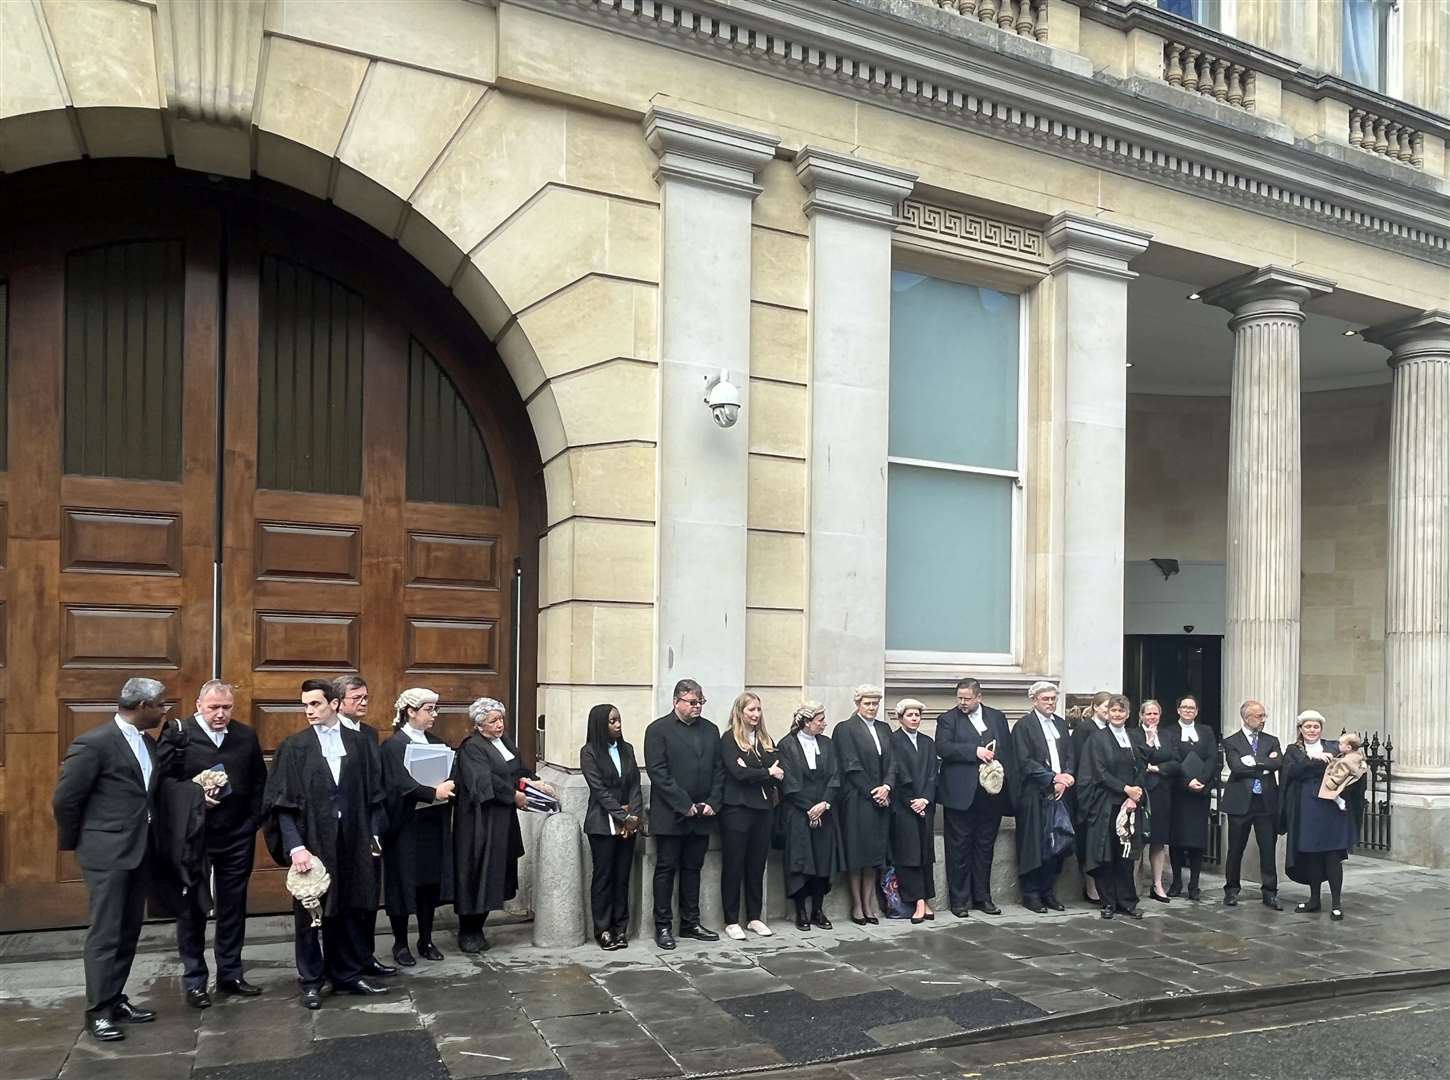 Criminal barristers from the Western Circuit line up outside Bristol Crown Court (Rod Minchin/PA)